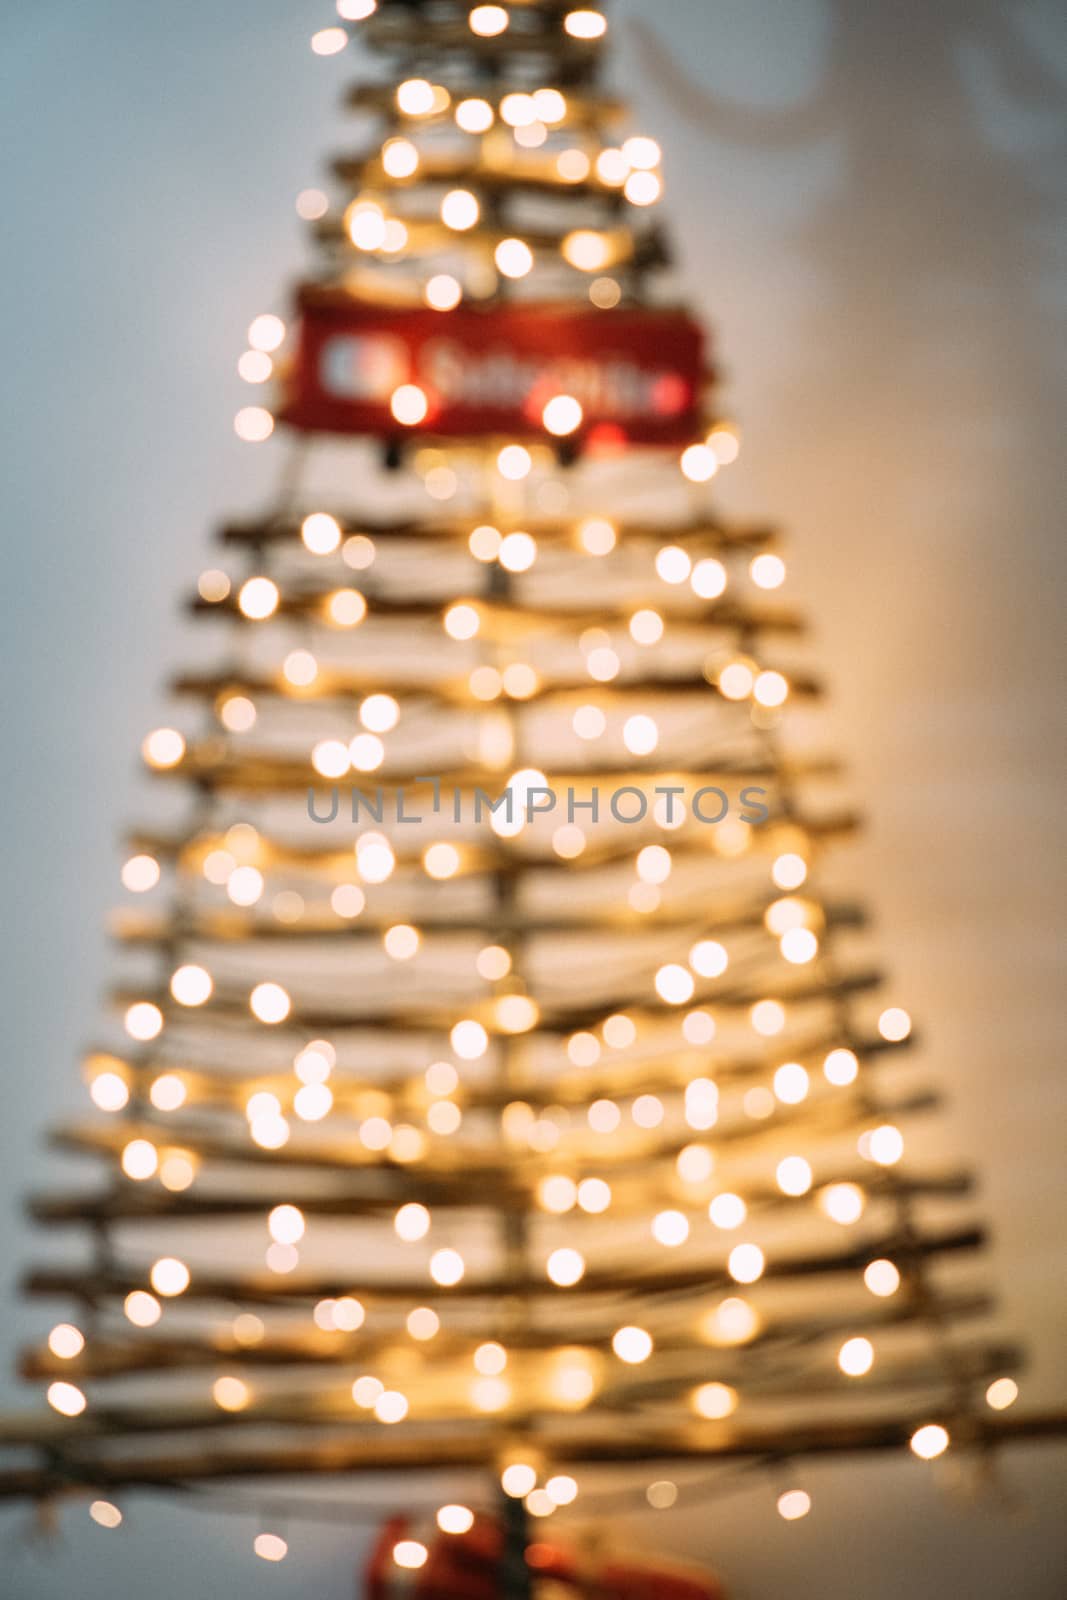 Christmas tree out of focus on a white background